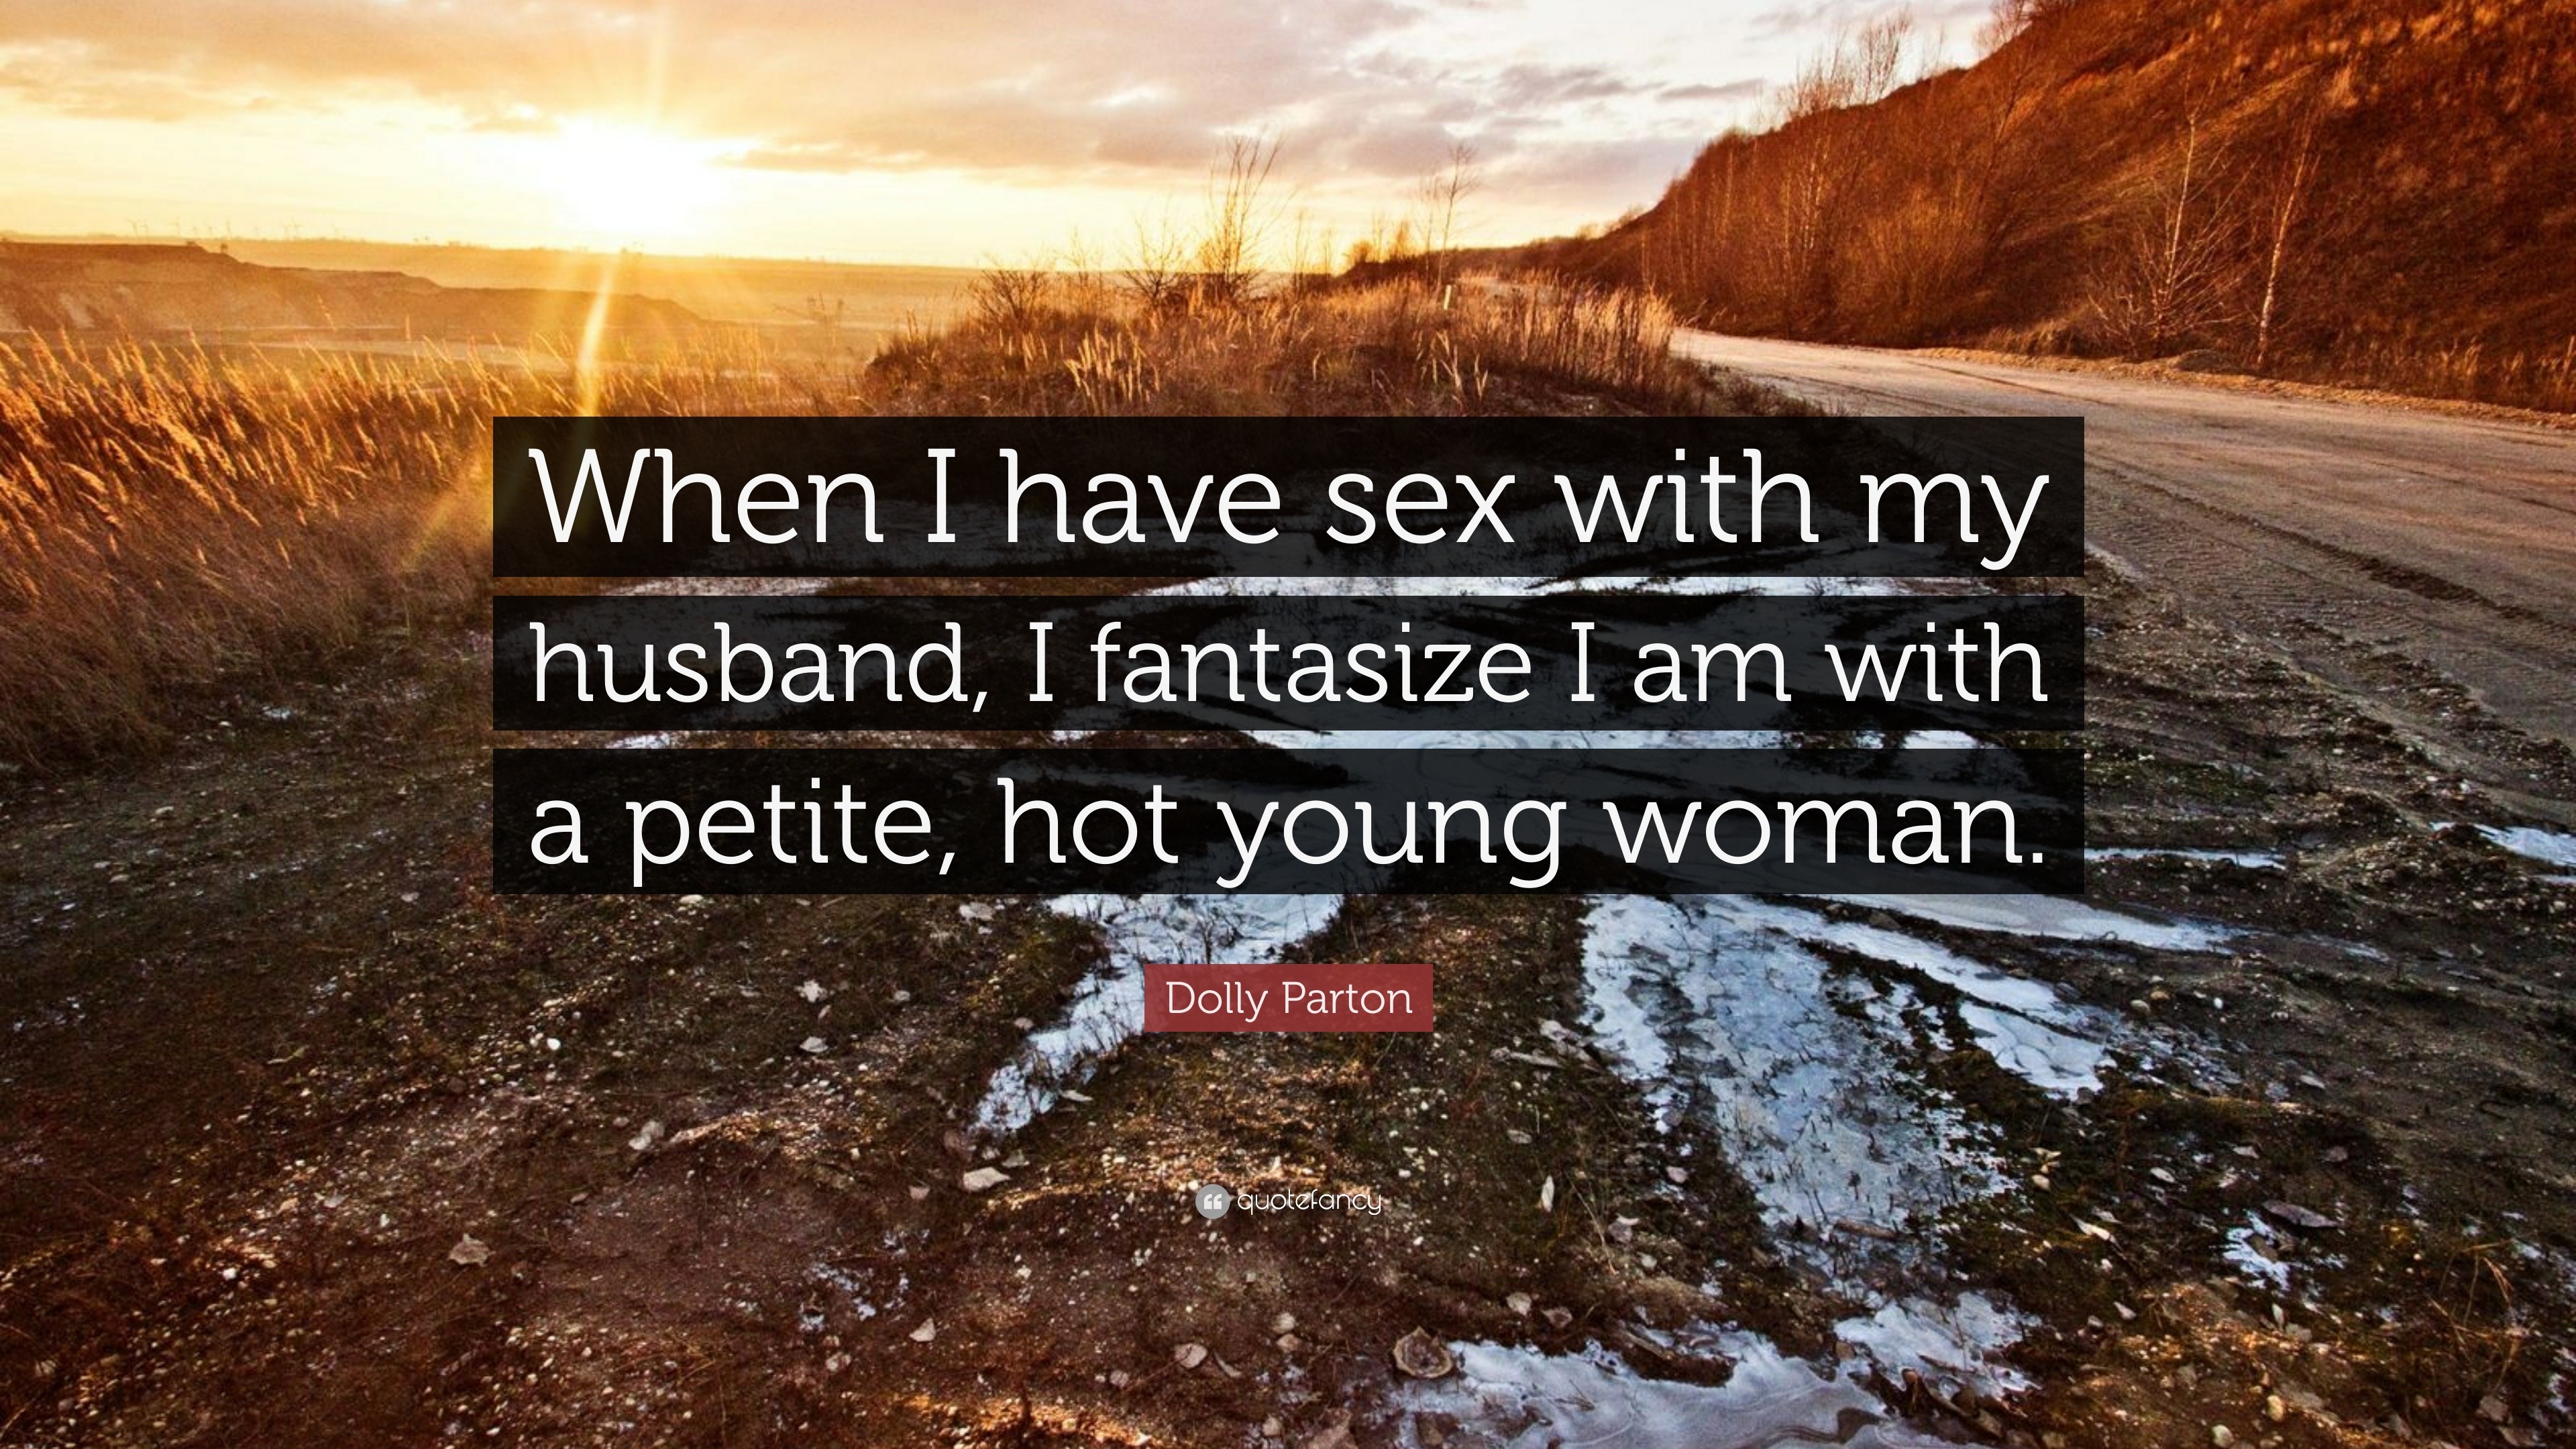 Dolly Parton Quote “When I have sex with my husband, I fantasize I am with a